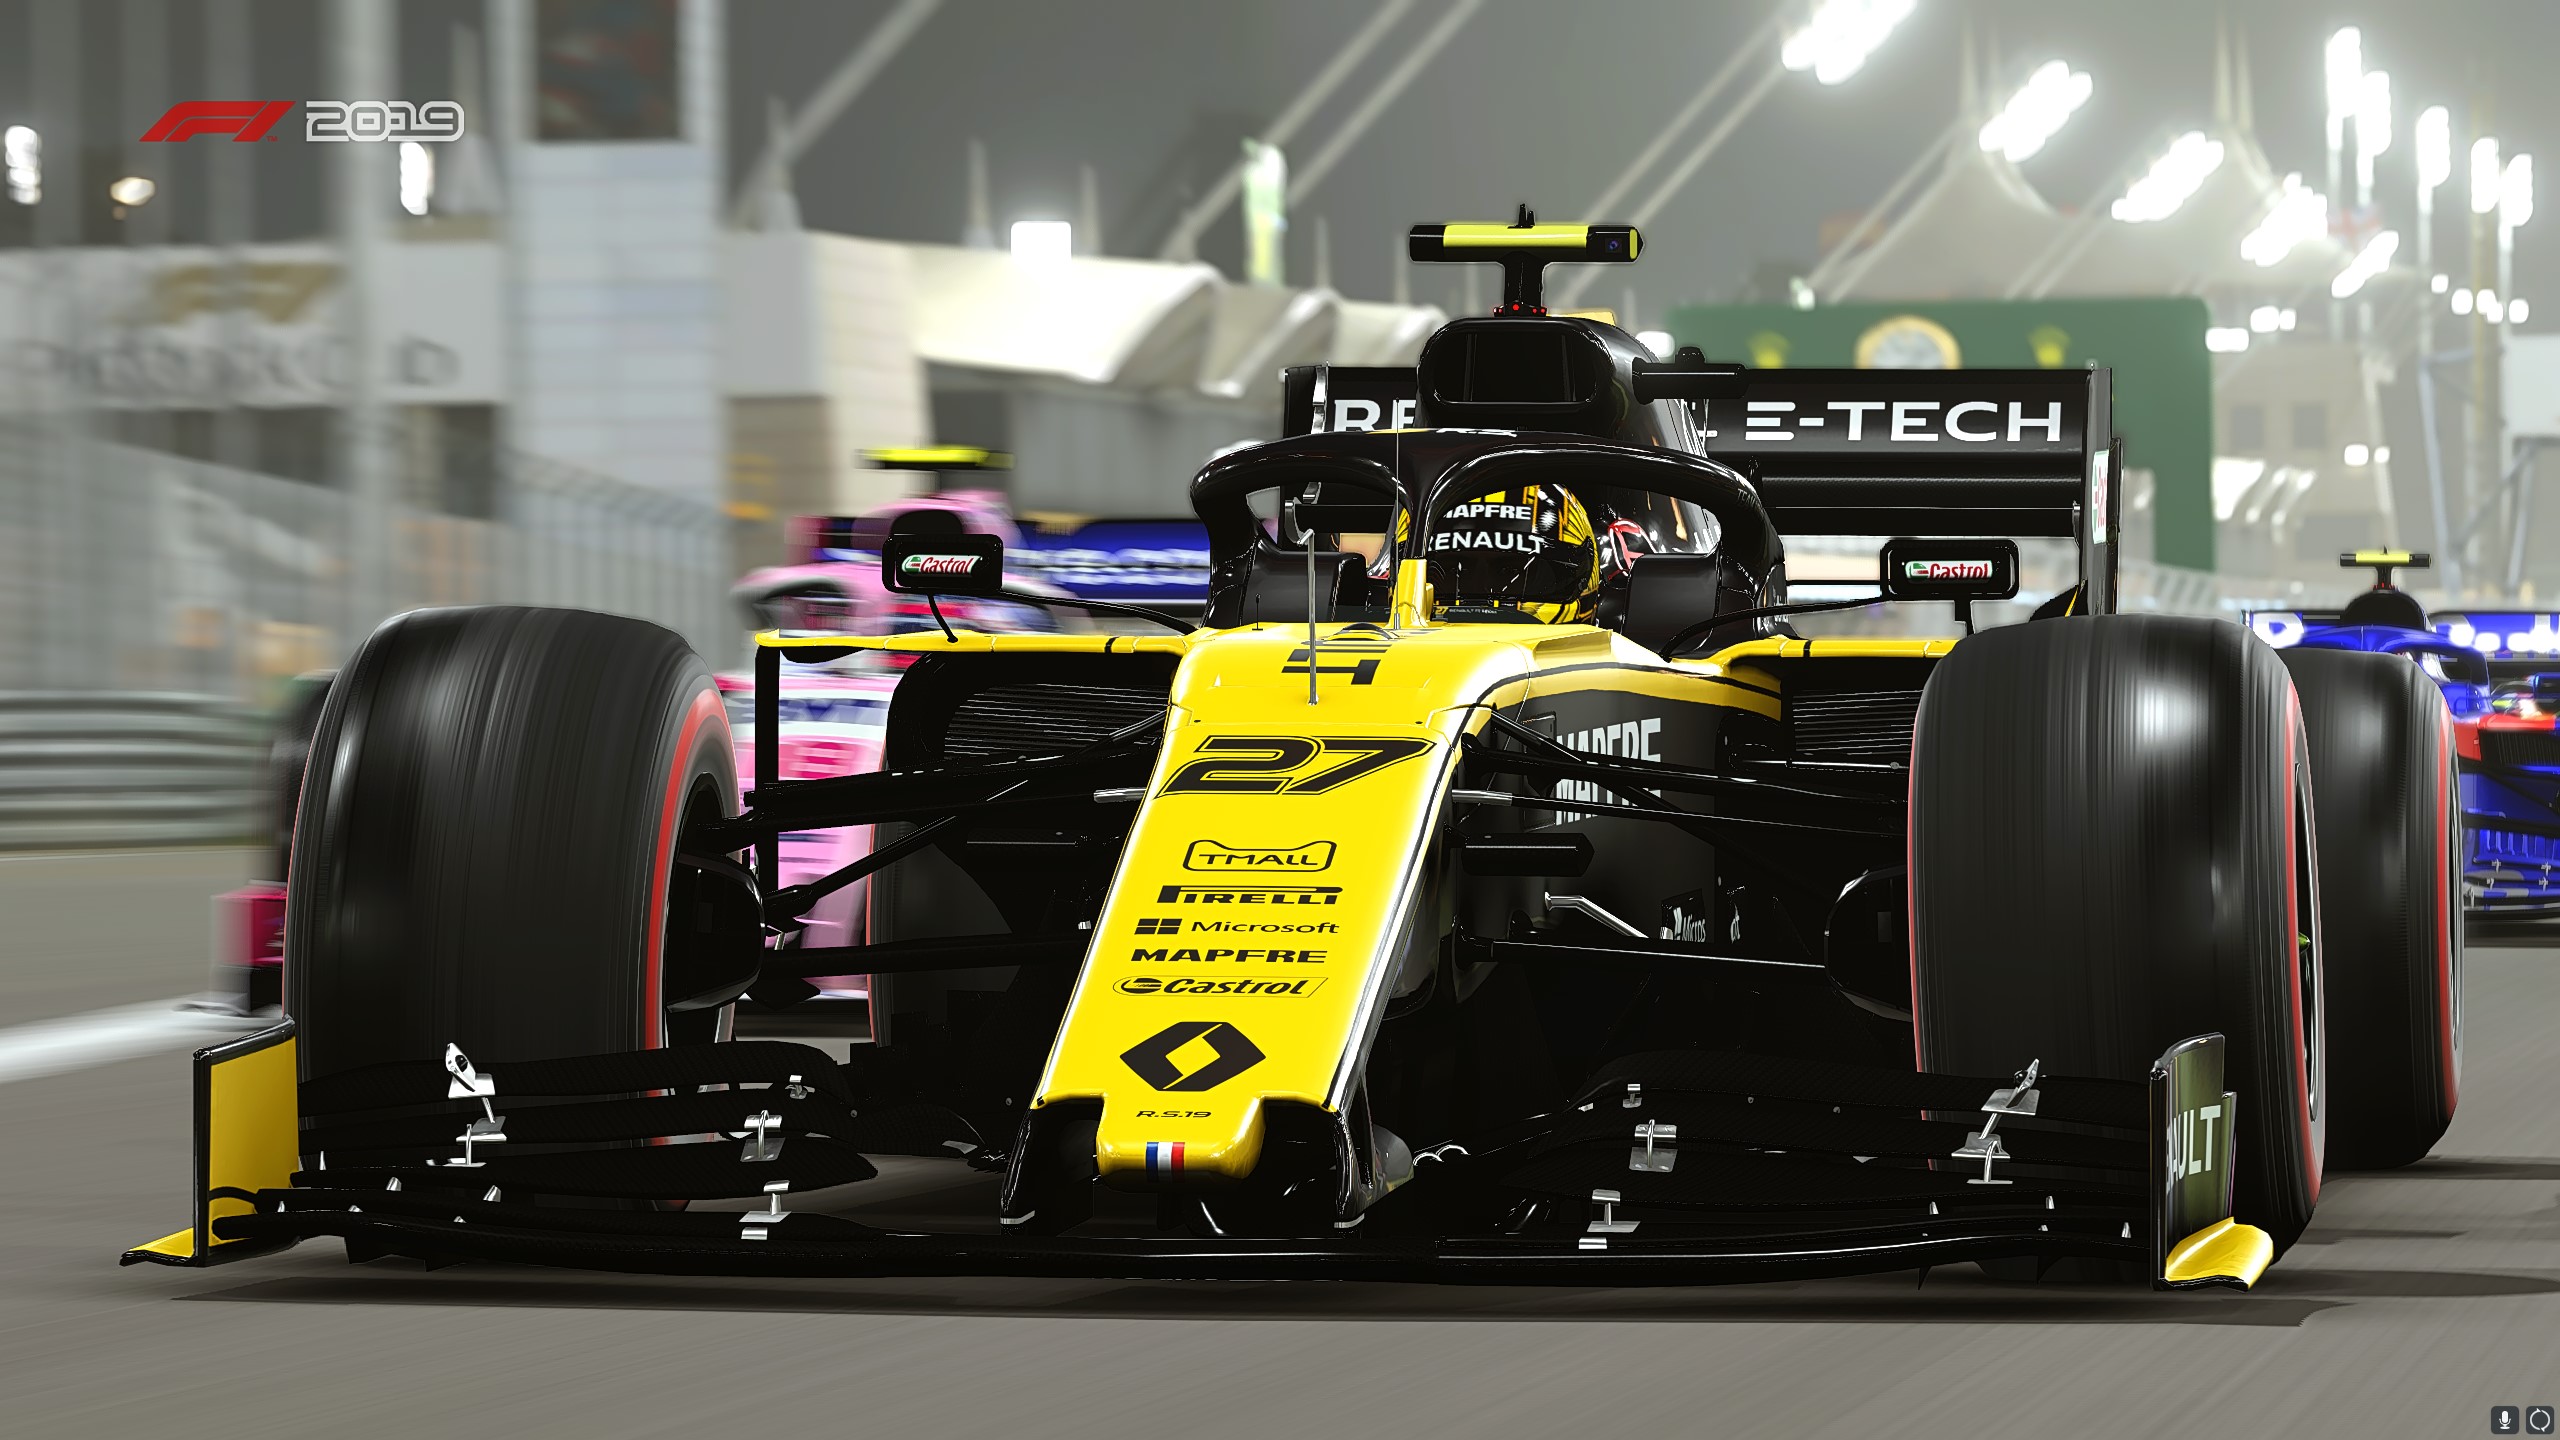 video game, f1 2019, race car, renault r s 19